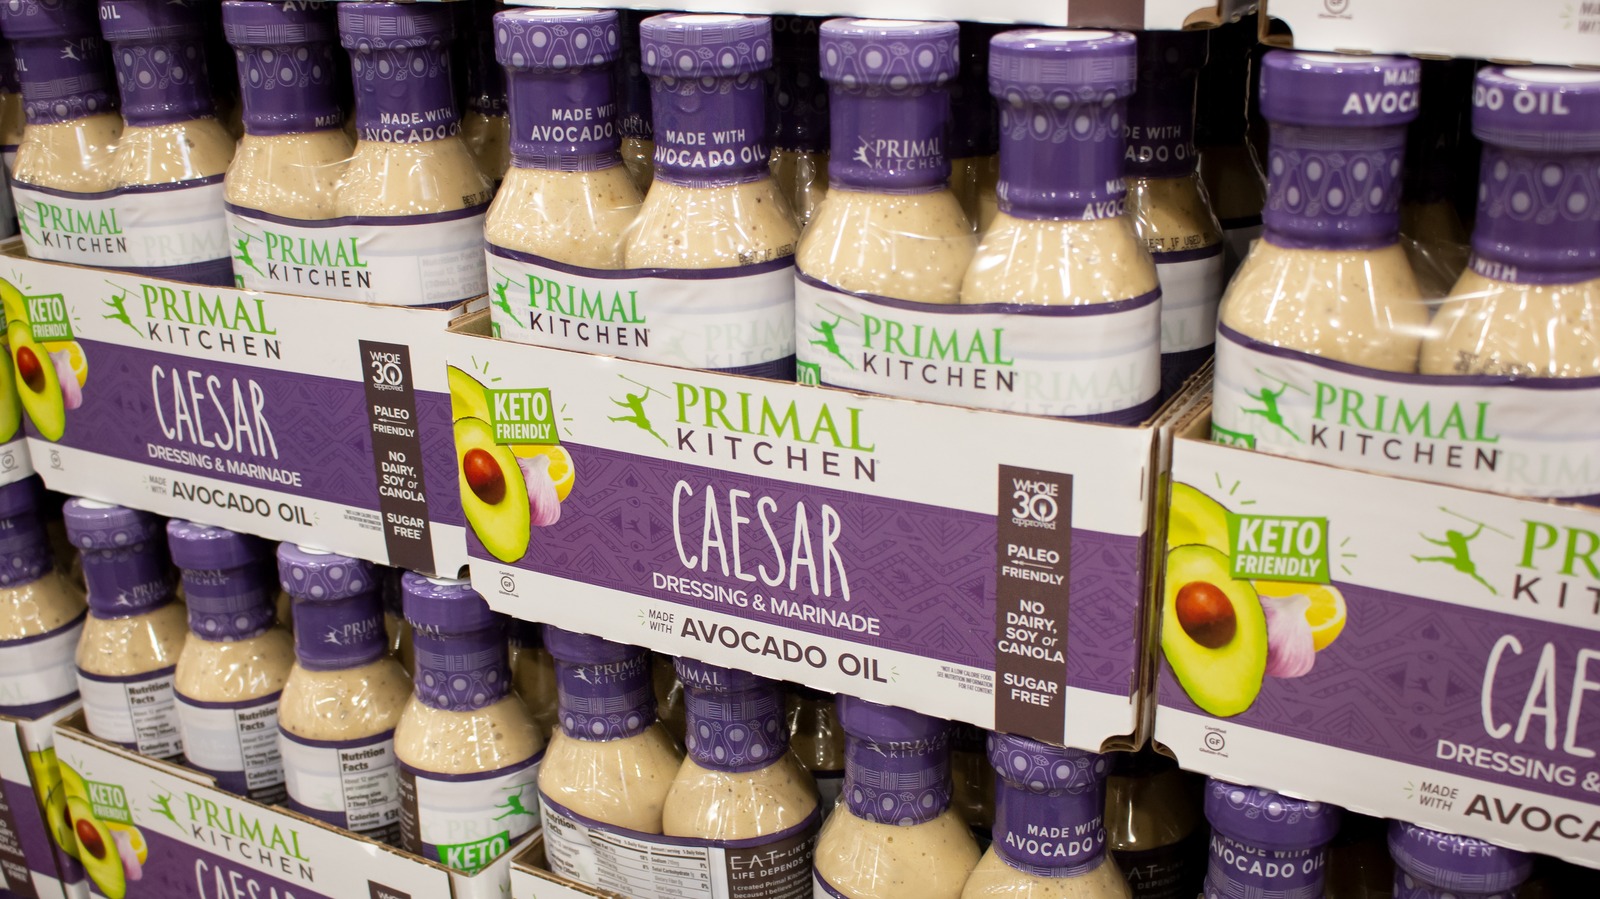 https://www.mashed.com/img/gallery/why-you-should-think-twice-about-saving-costcos-caesar-dressing/l-intro-1664799547.jpg